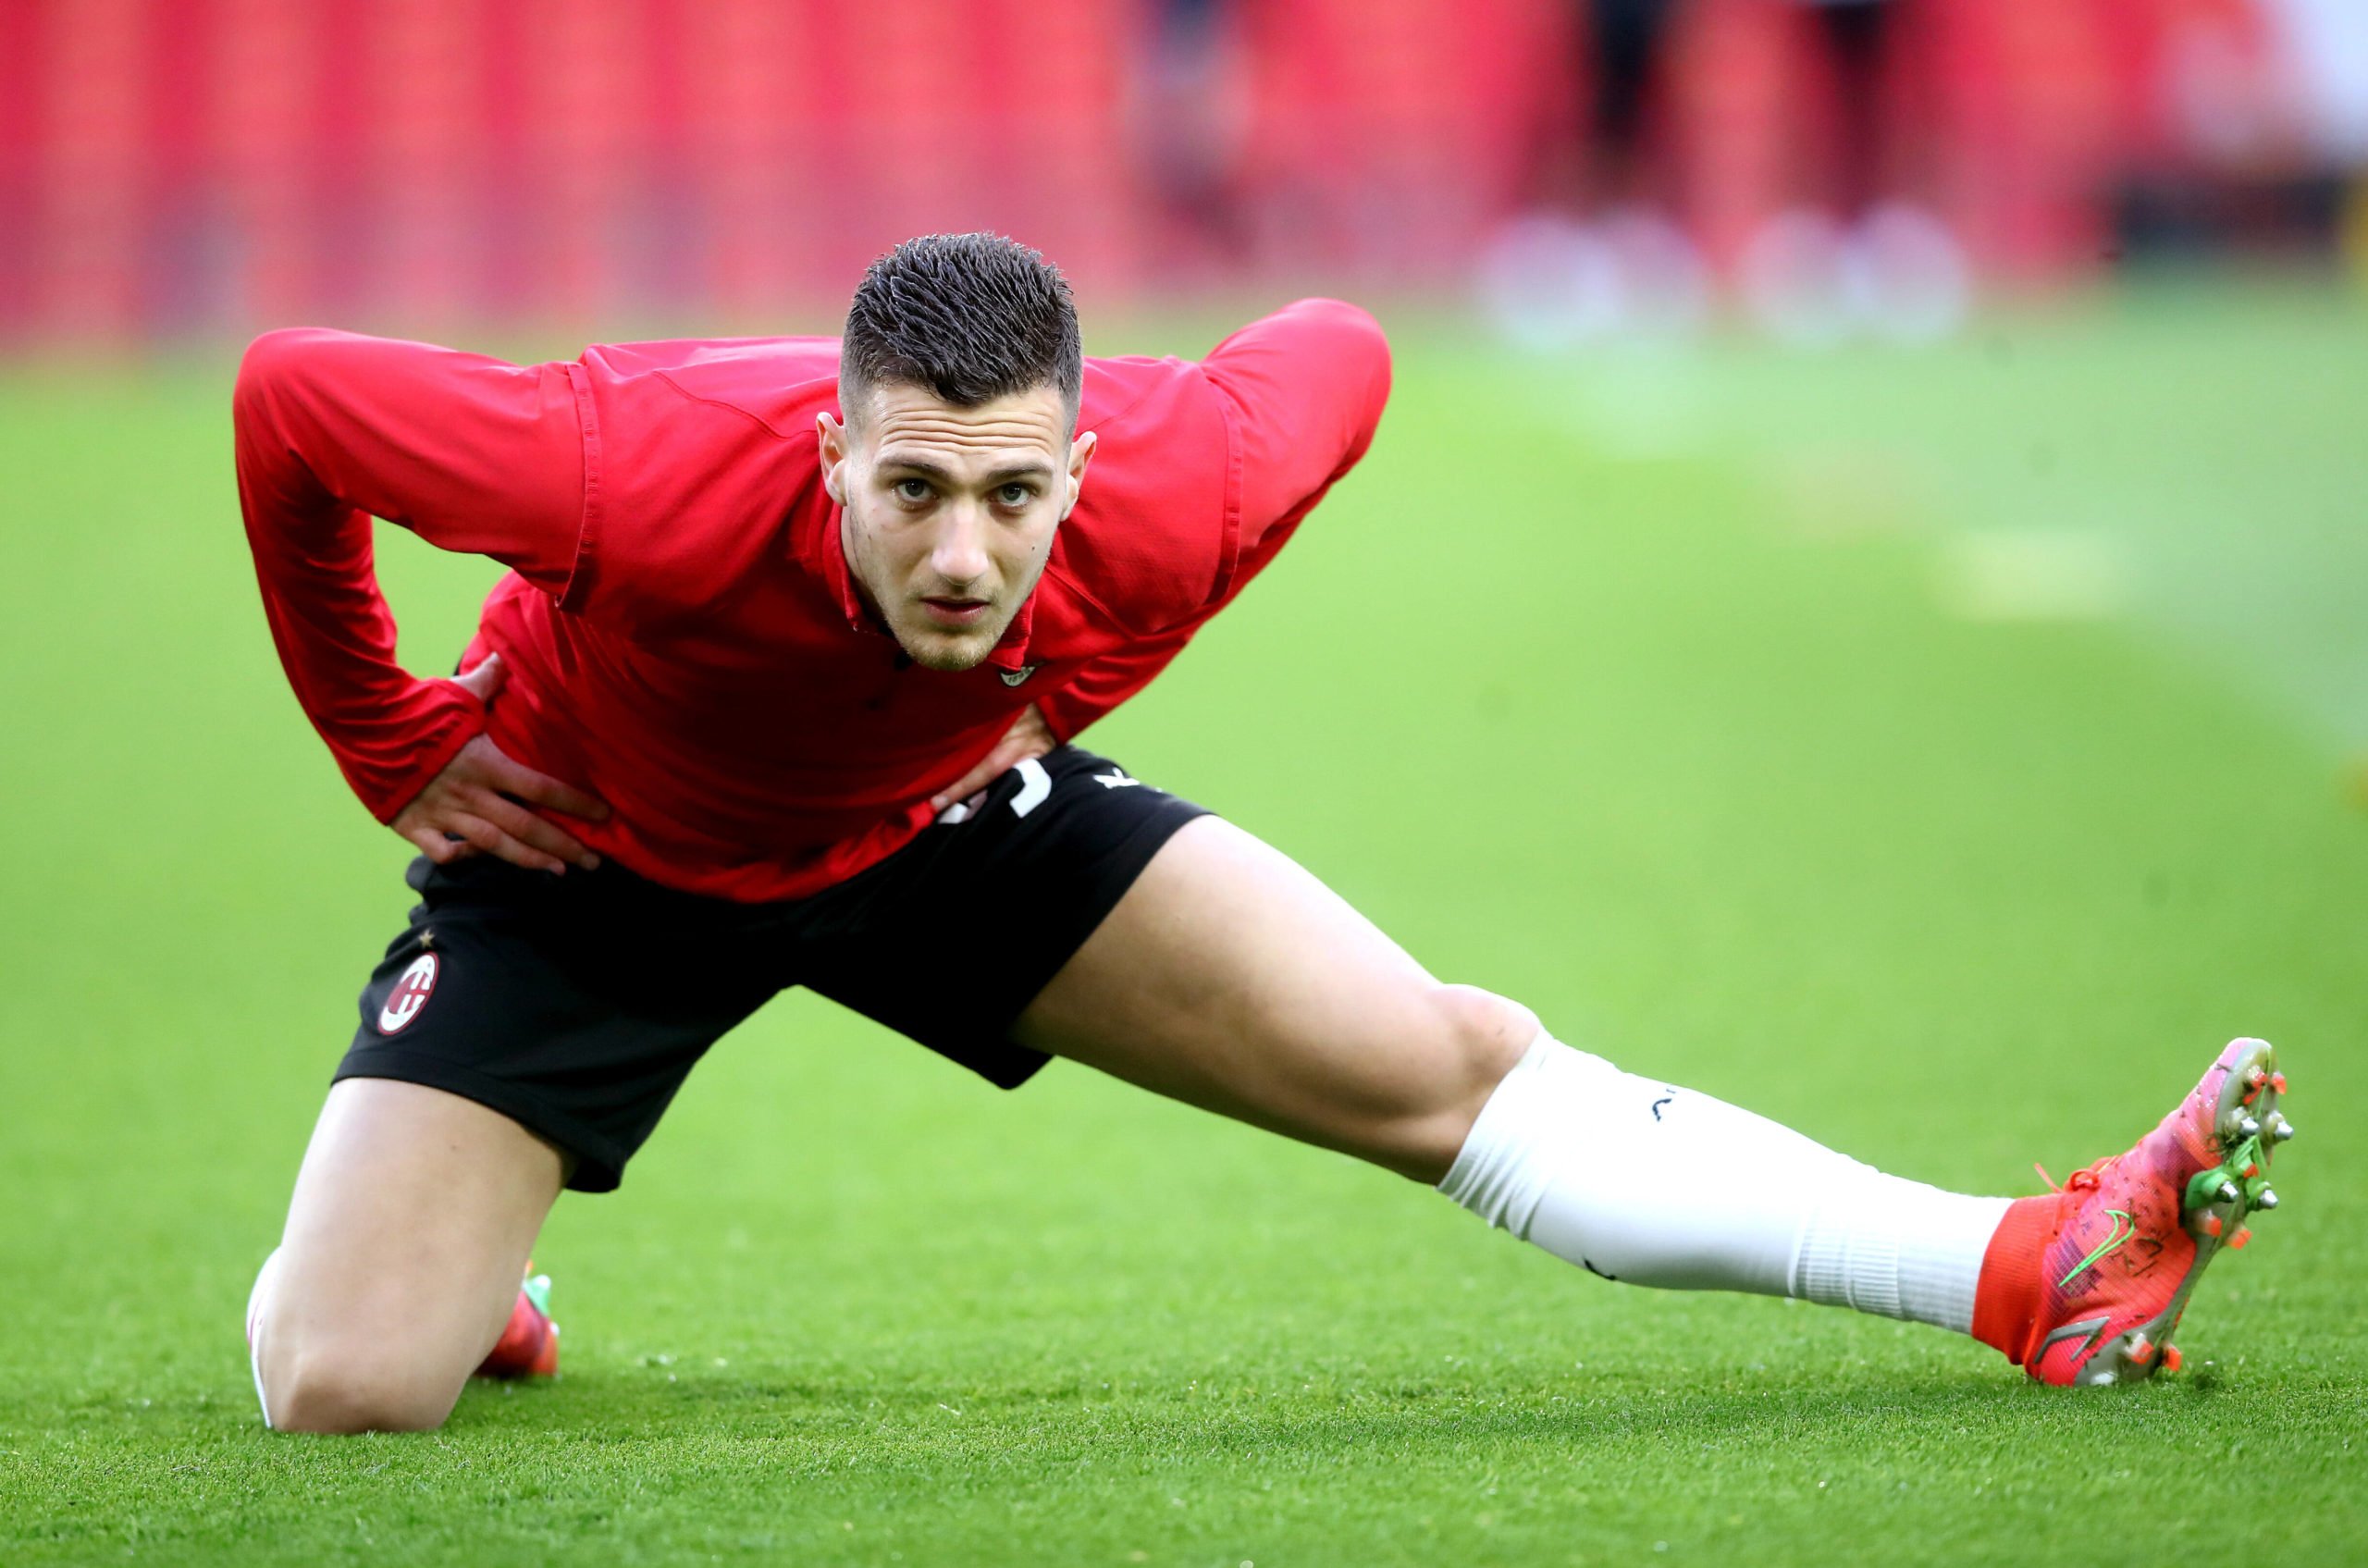 Real Madrid eyeing a move for Diogo Dalot who is seen in the photo